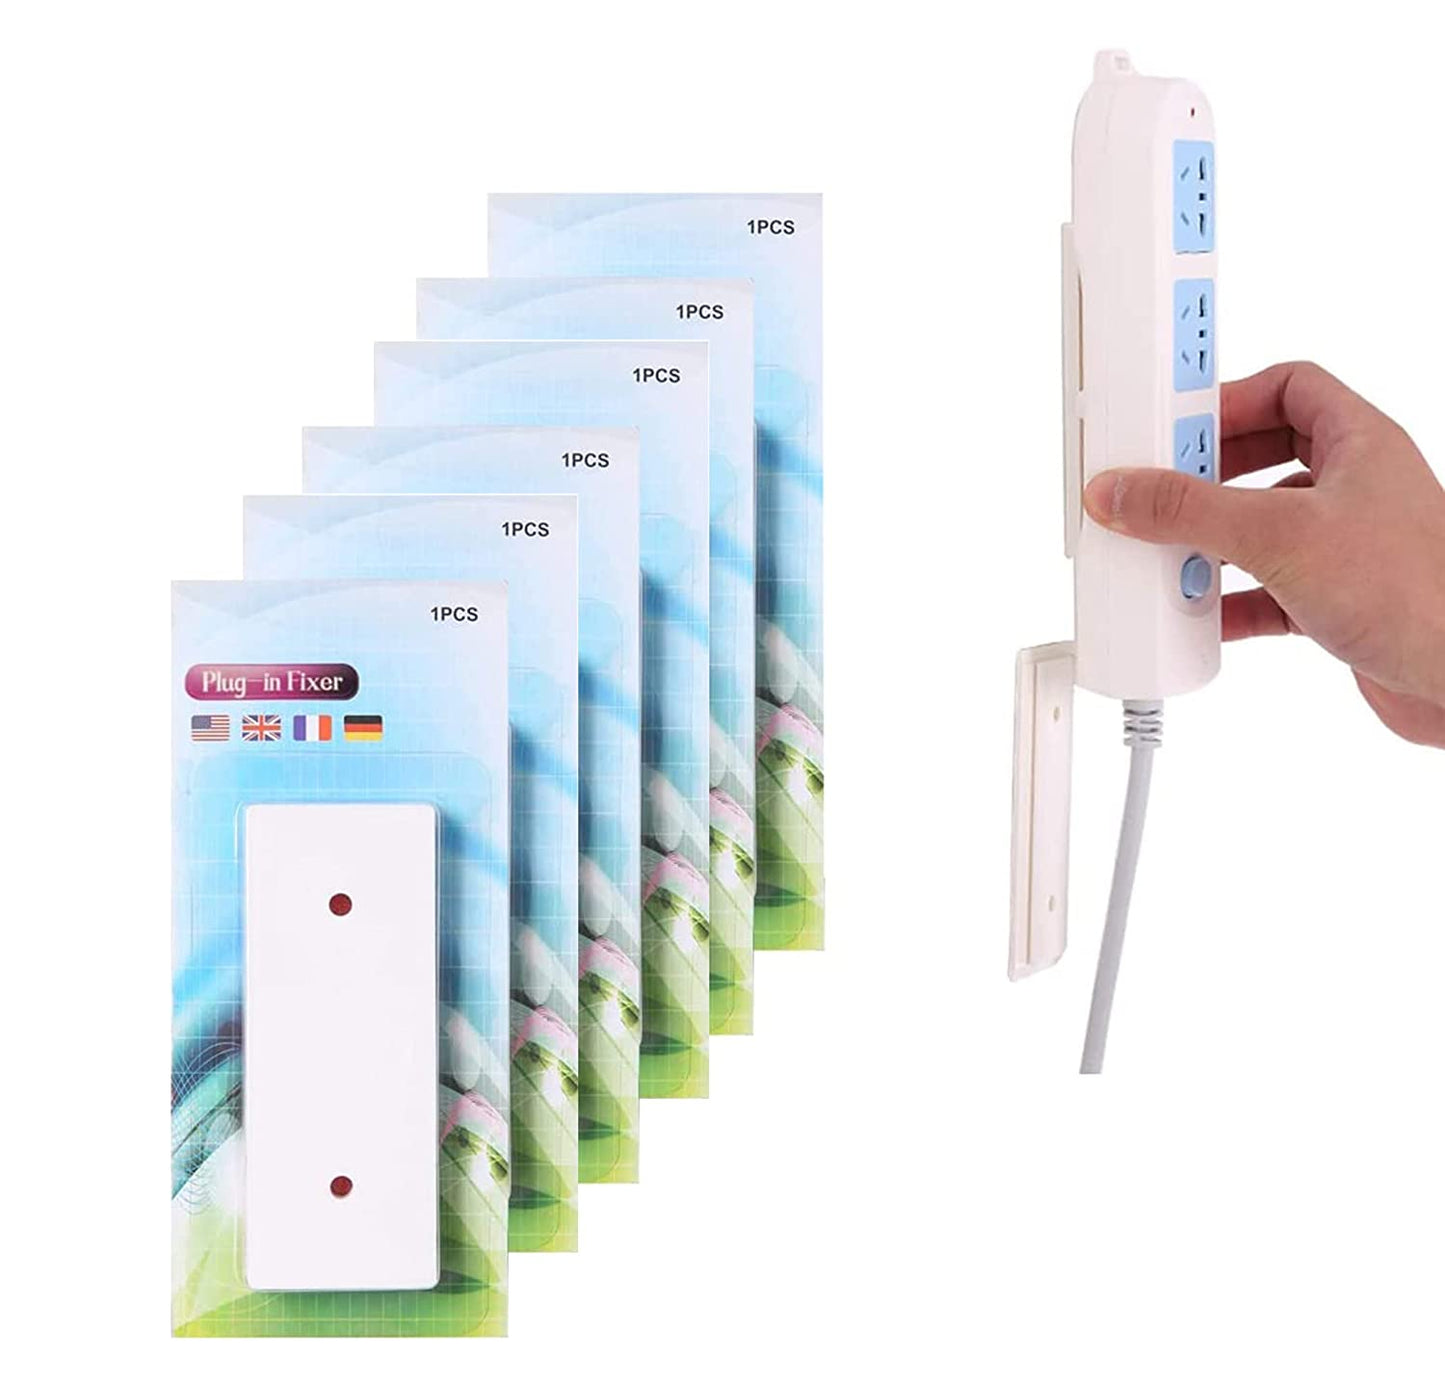 Power Strip Holder Fixator, No Hole Plug-in, Loading 10Kg Maximum, for WiFi Router, Remote Control, etc.